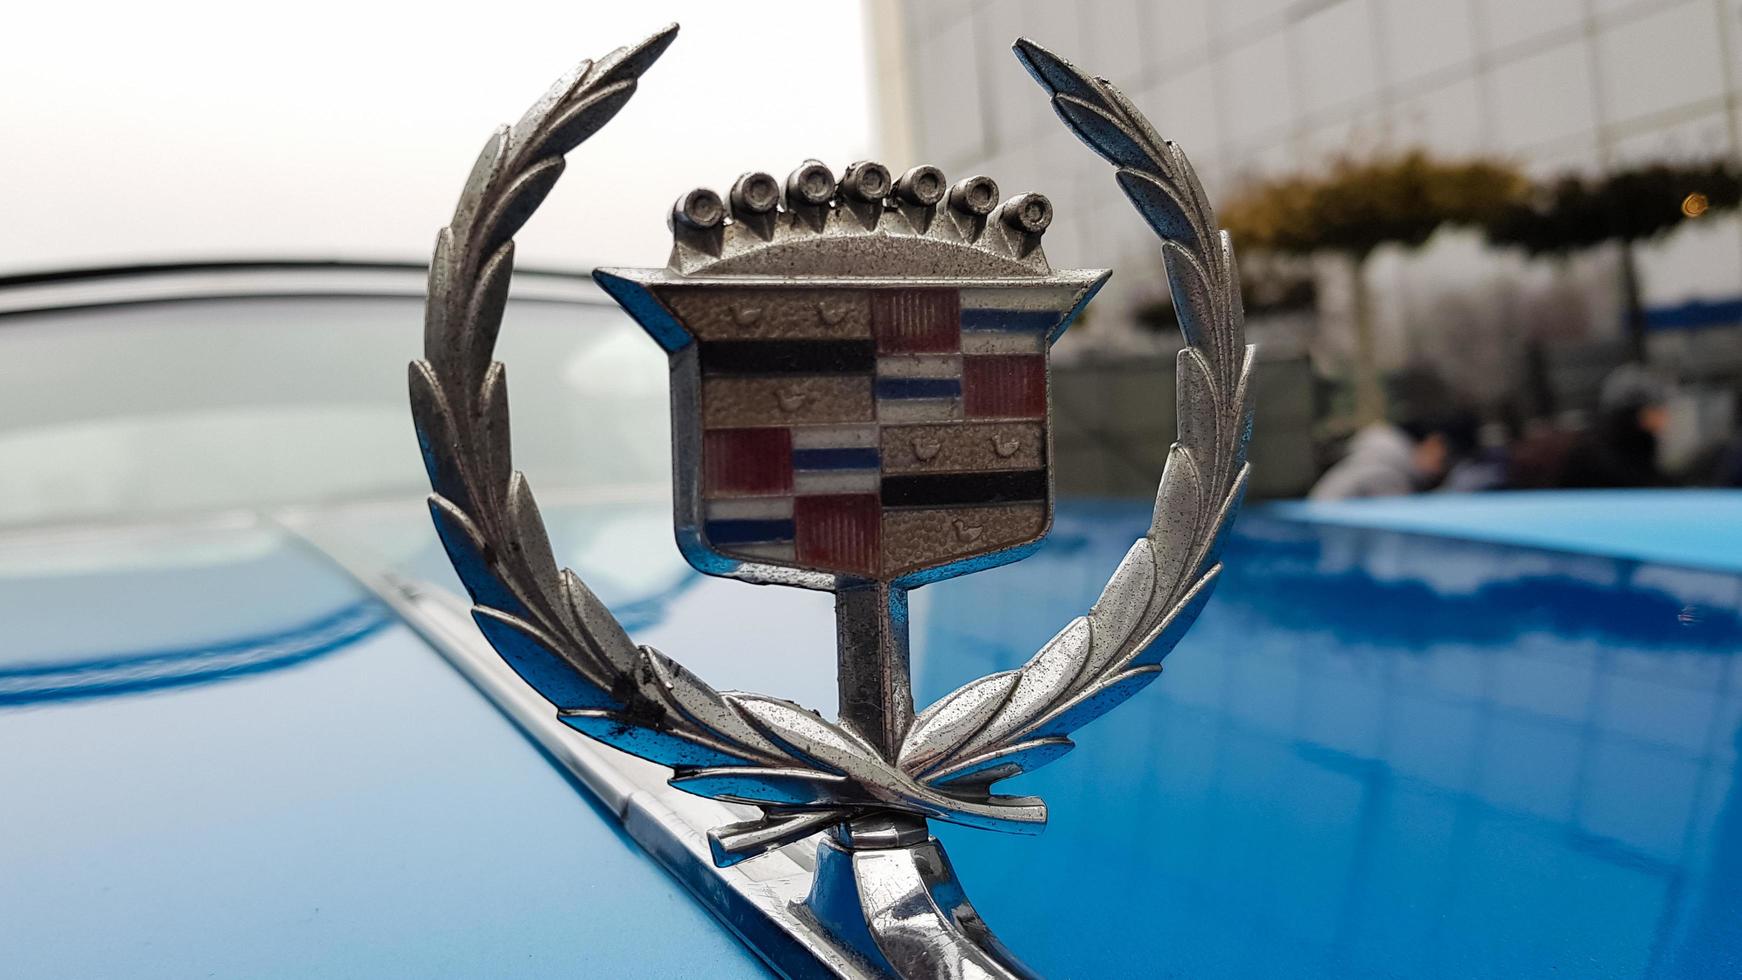 Ukraine, Kiev - March 27, 2020. vintage retro classic car Cadillac beatriz of blue color. emblem on the hood with a logo. original parts of the restored American car. photos from different angles.